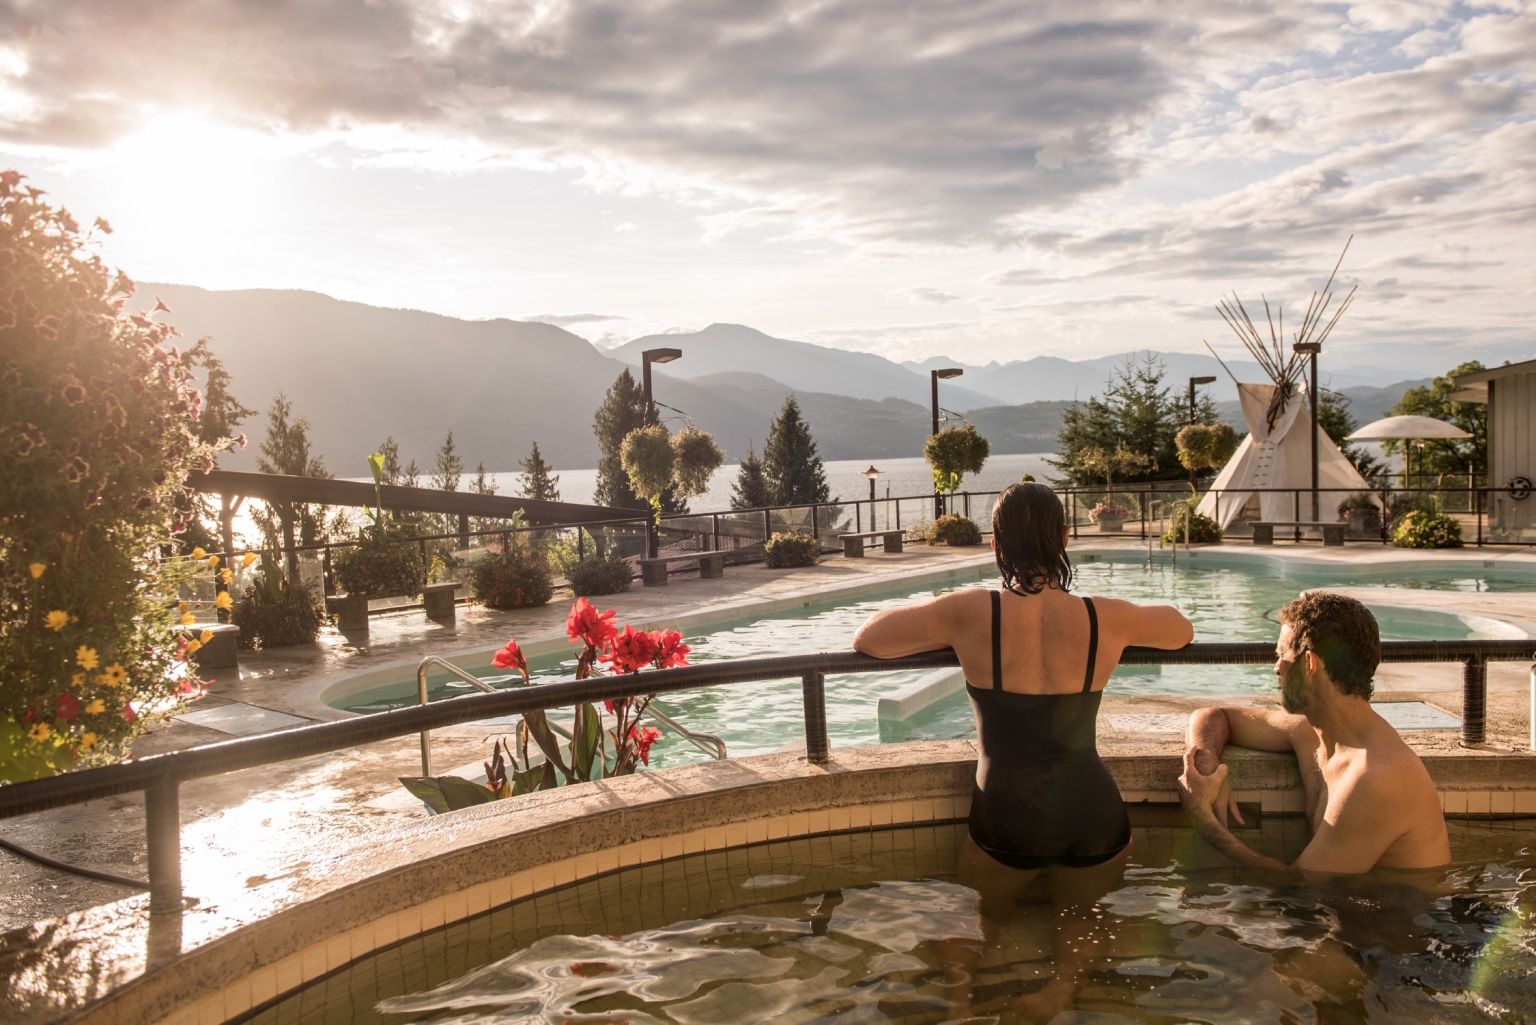 People in a hot spring tub looking out over mountains surrounding Kootenay Lake.